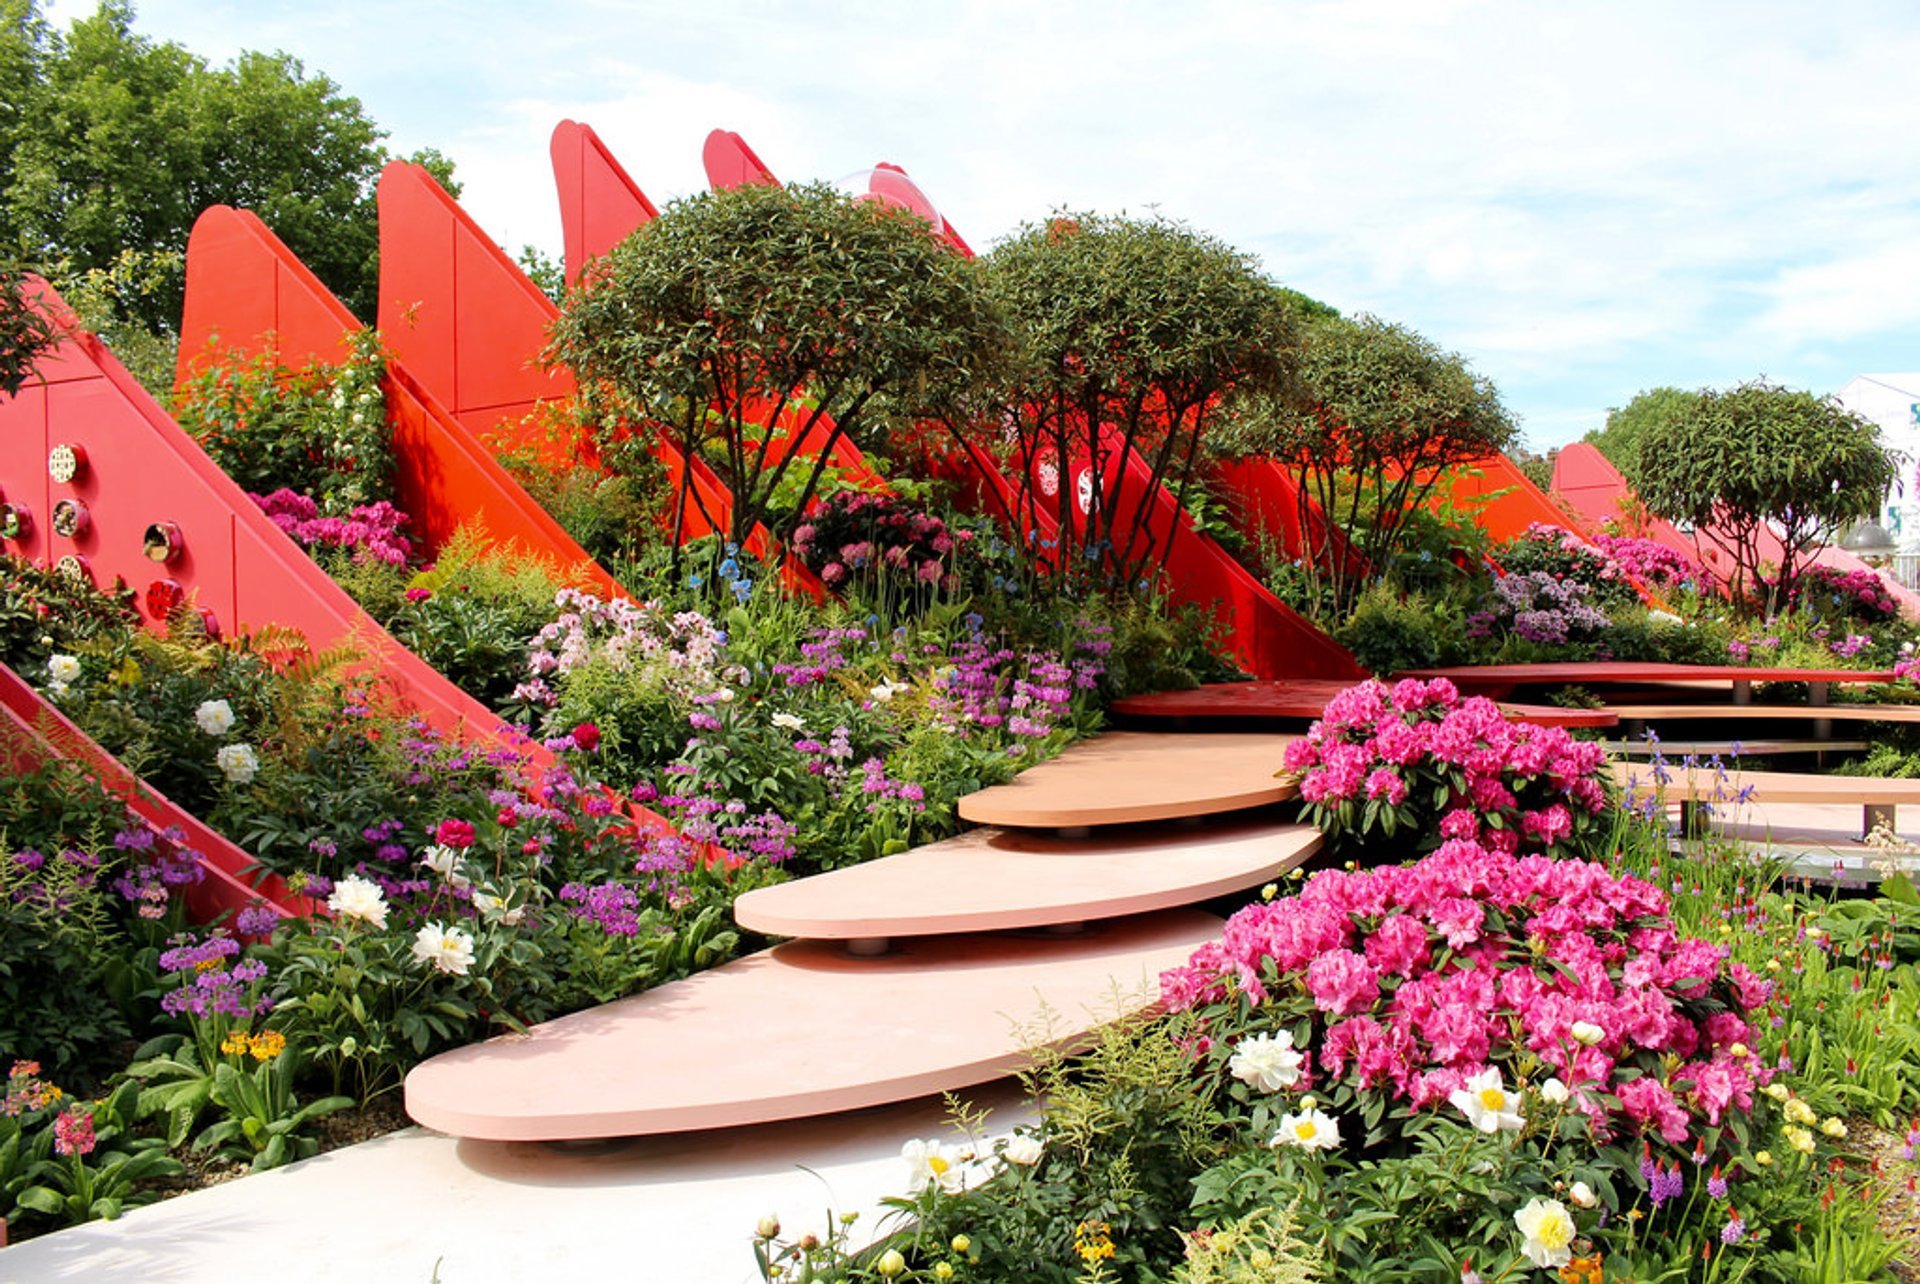 rhs chelsea flower show 2019 in london - dates & map